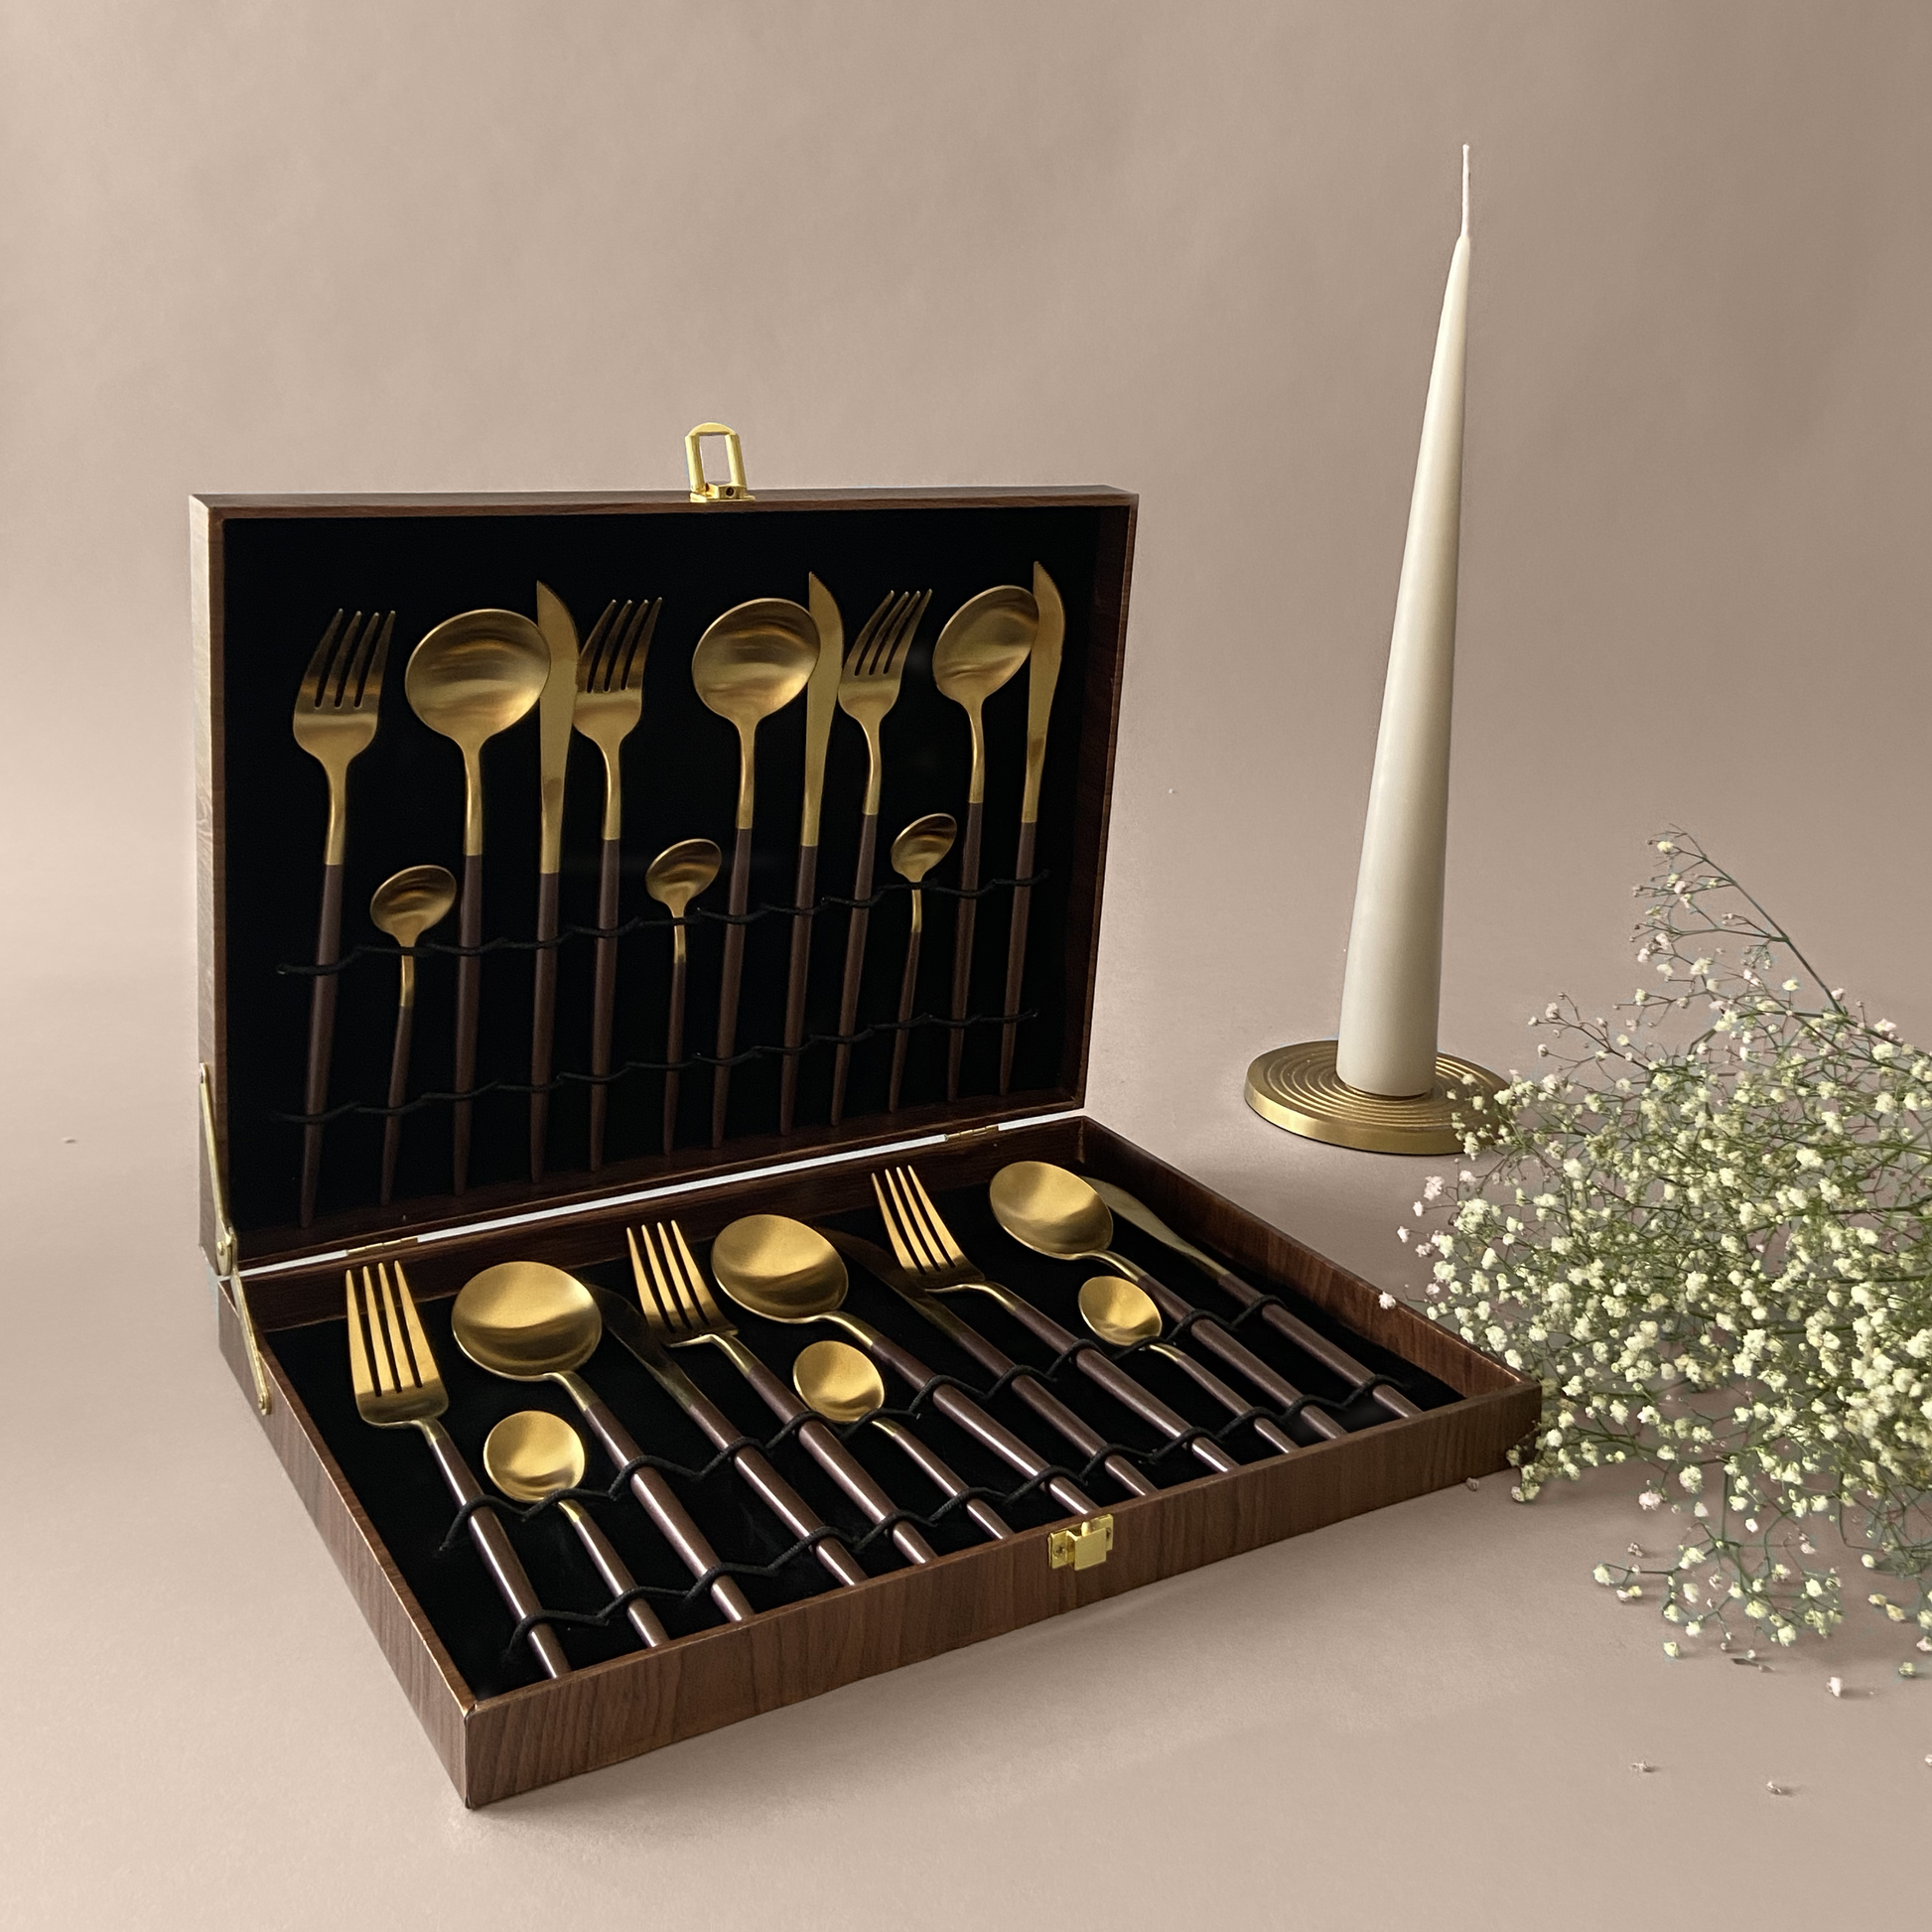 Nordic Imperial Coffee Gold Cutlery Set (Set of 24 pcs)